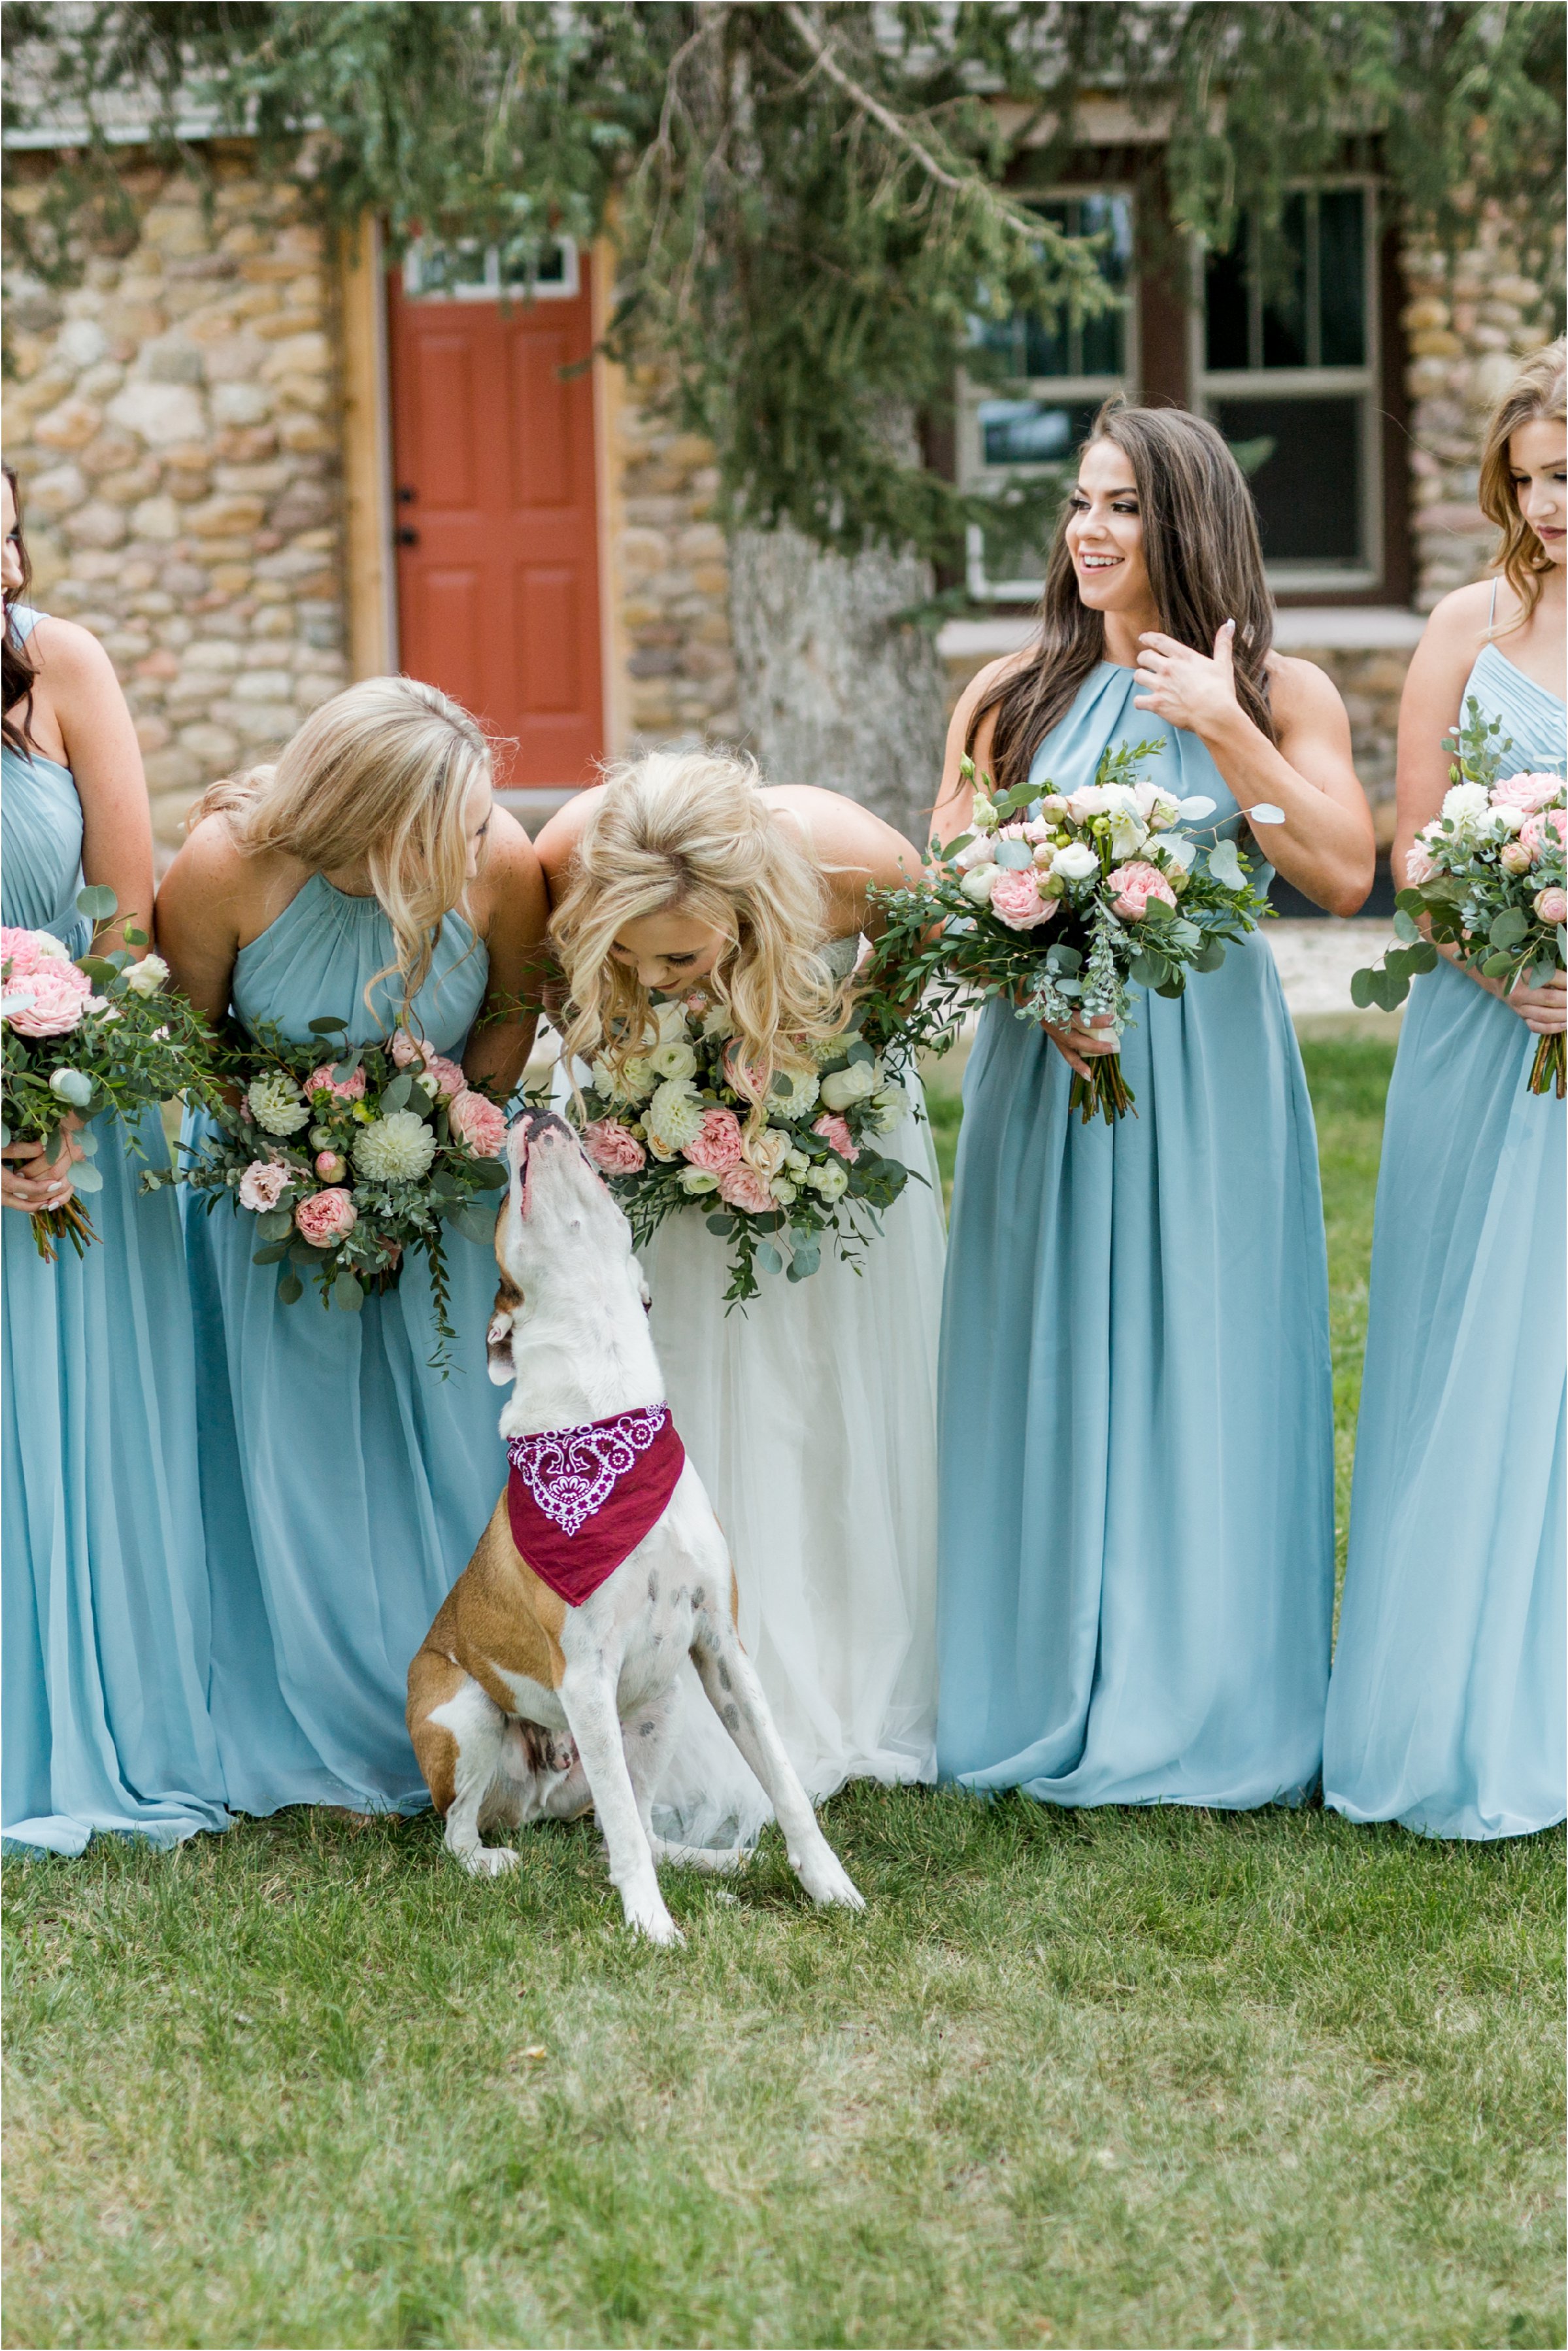 the bride leaning down to kiss her dog